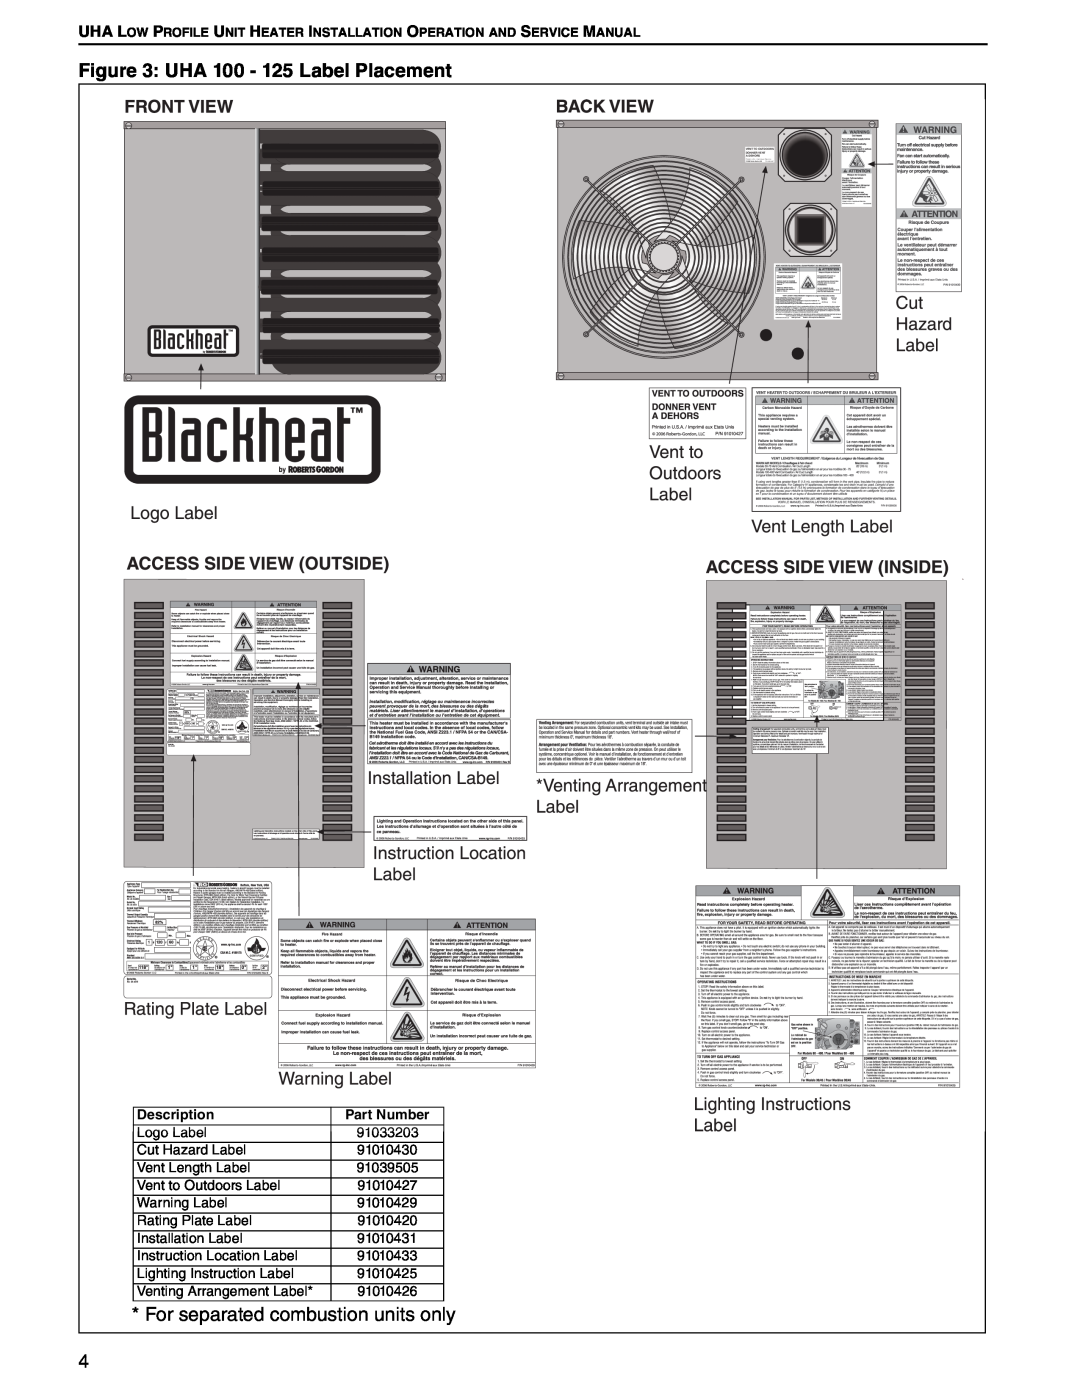 Roberts Gorden 30, 75, 45, 60 service manual UHA 100 - 125 Label Placement, For separated combustion units only 